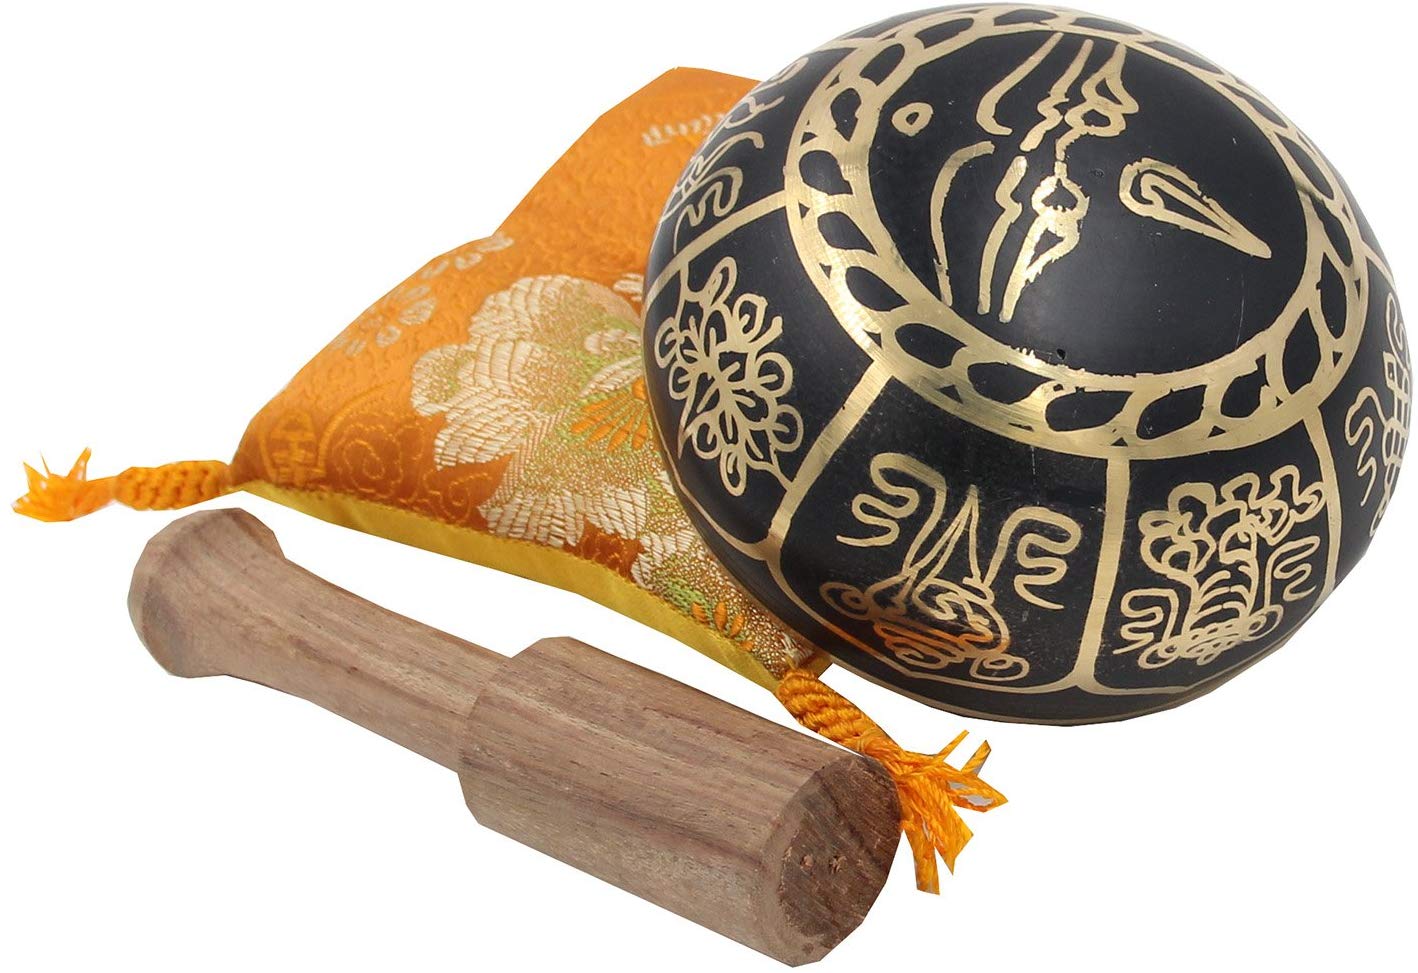 Gorgeous MEDITATION 8 Lucky Symbols Singing Bowl With Mallet - DharmaObjects